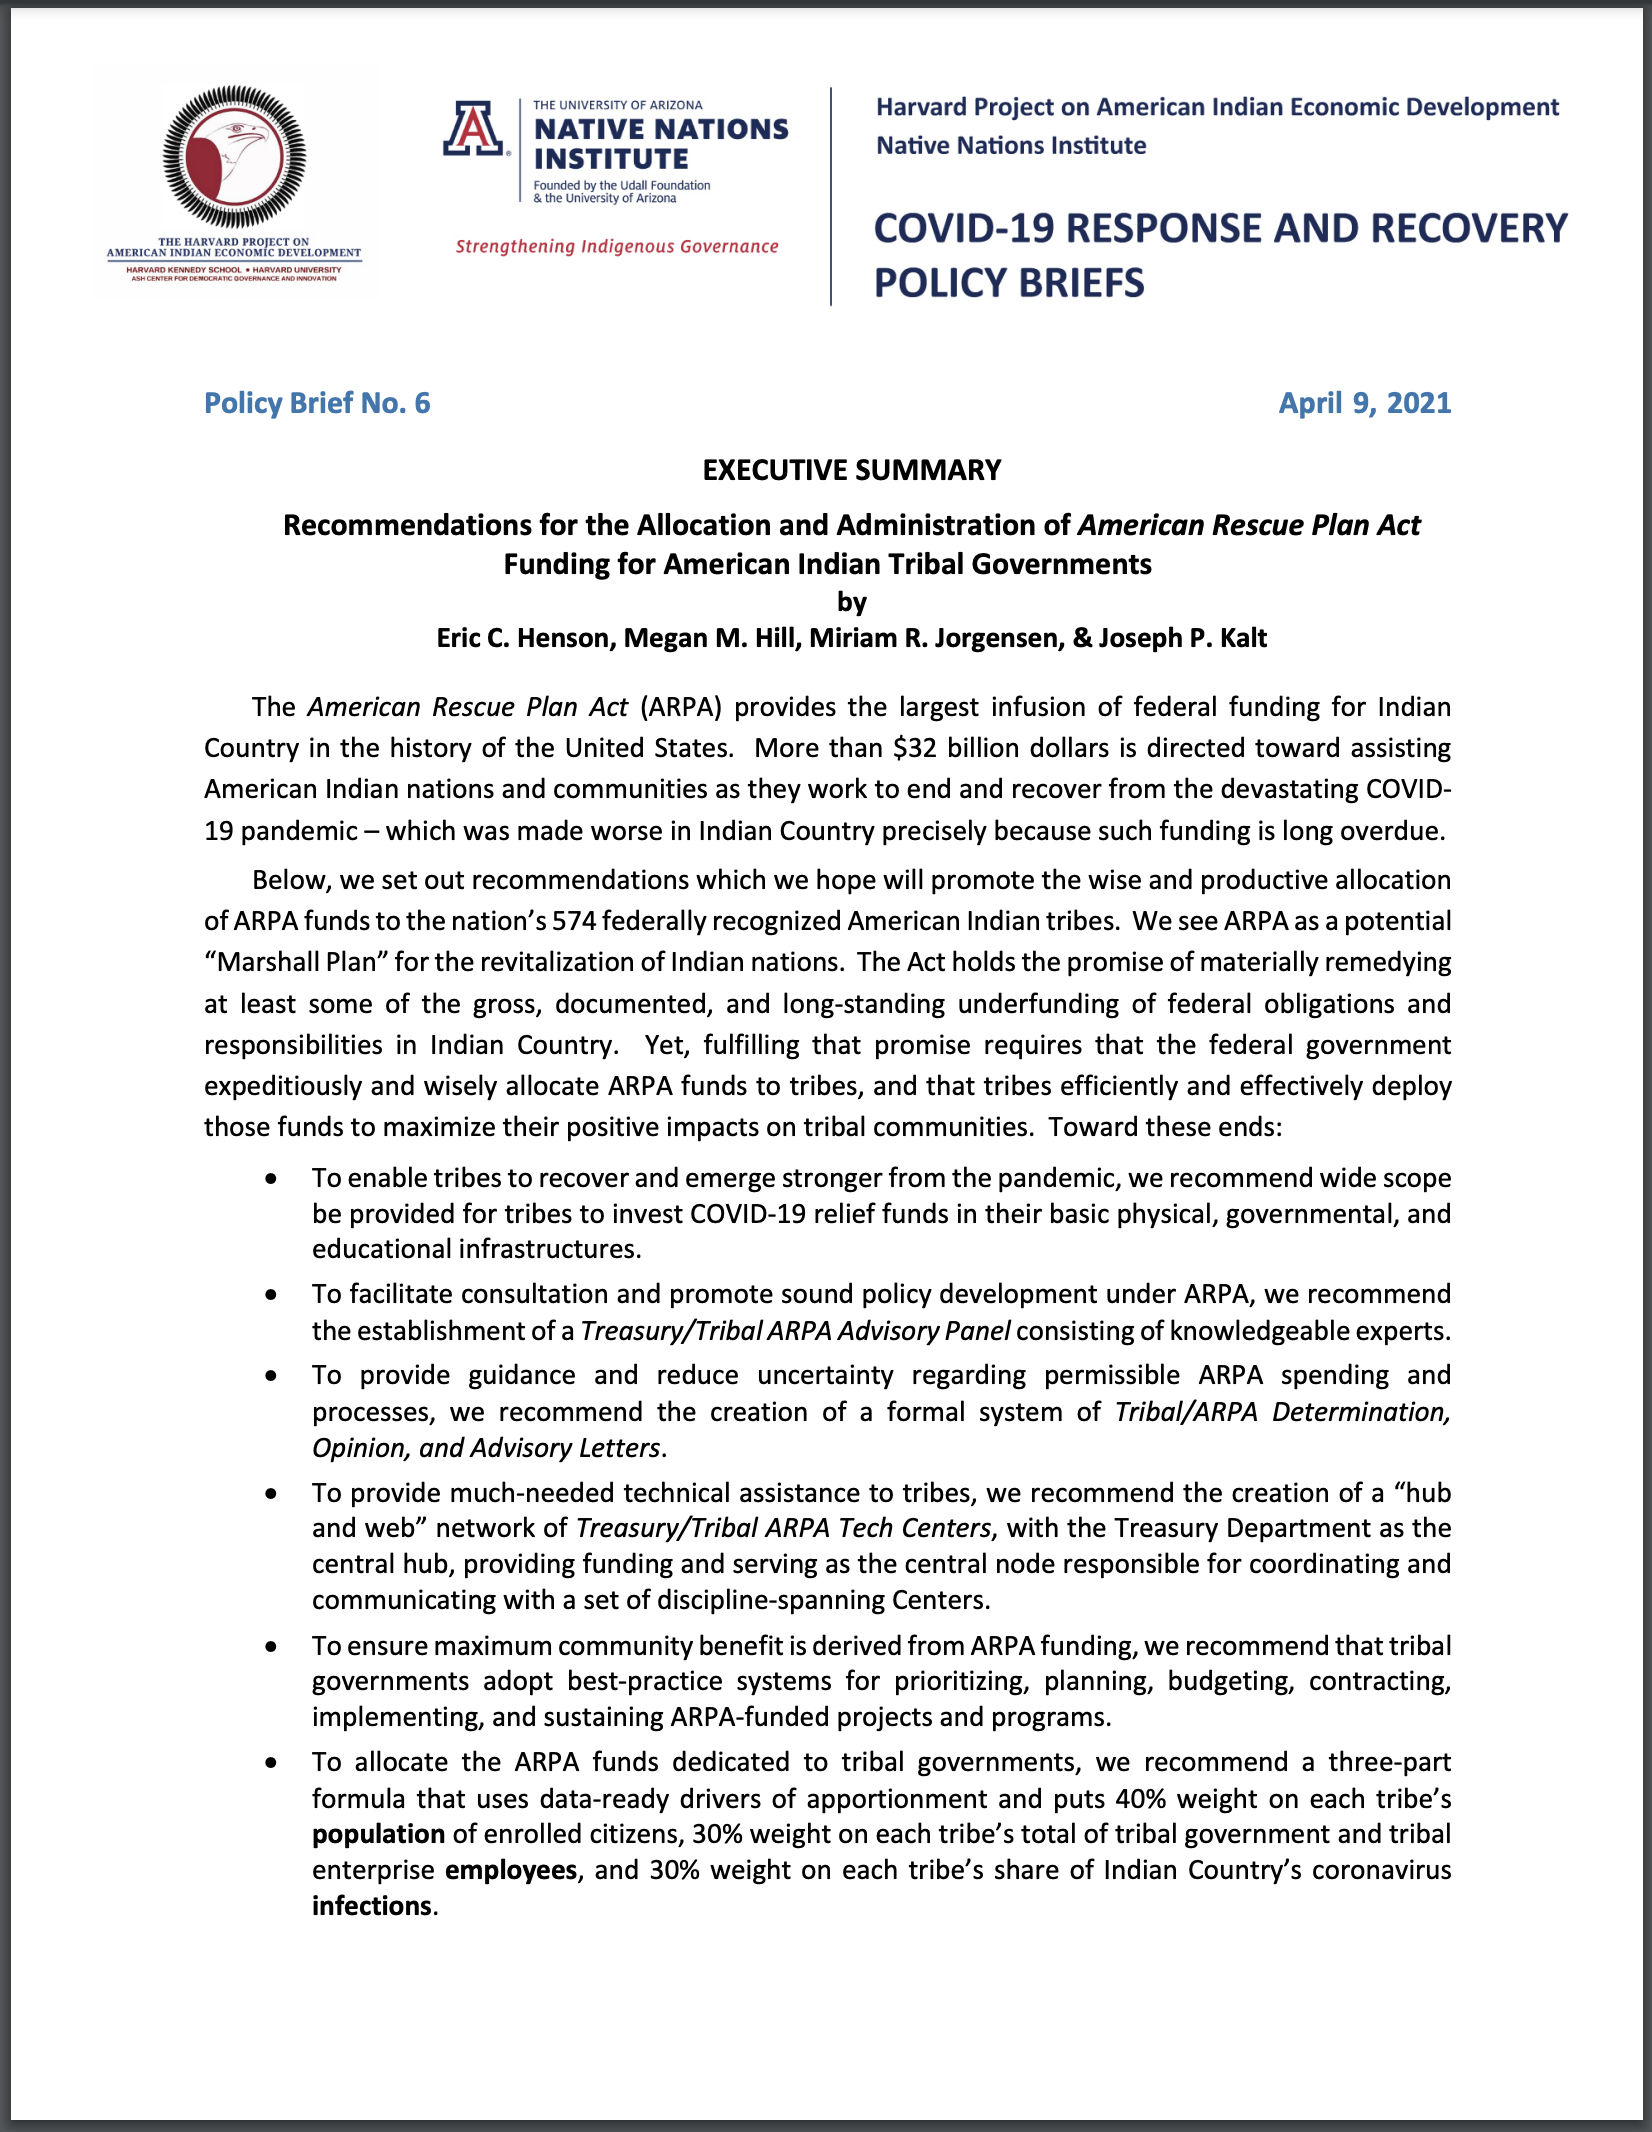 Recommendations for Allocation and Administration of American Rescue Plan Act Funding for American Indian Tribal Governments